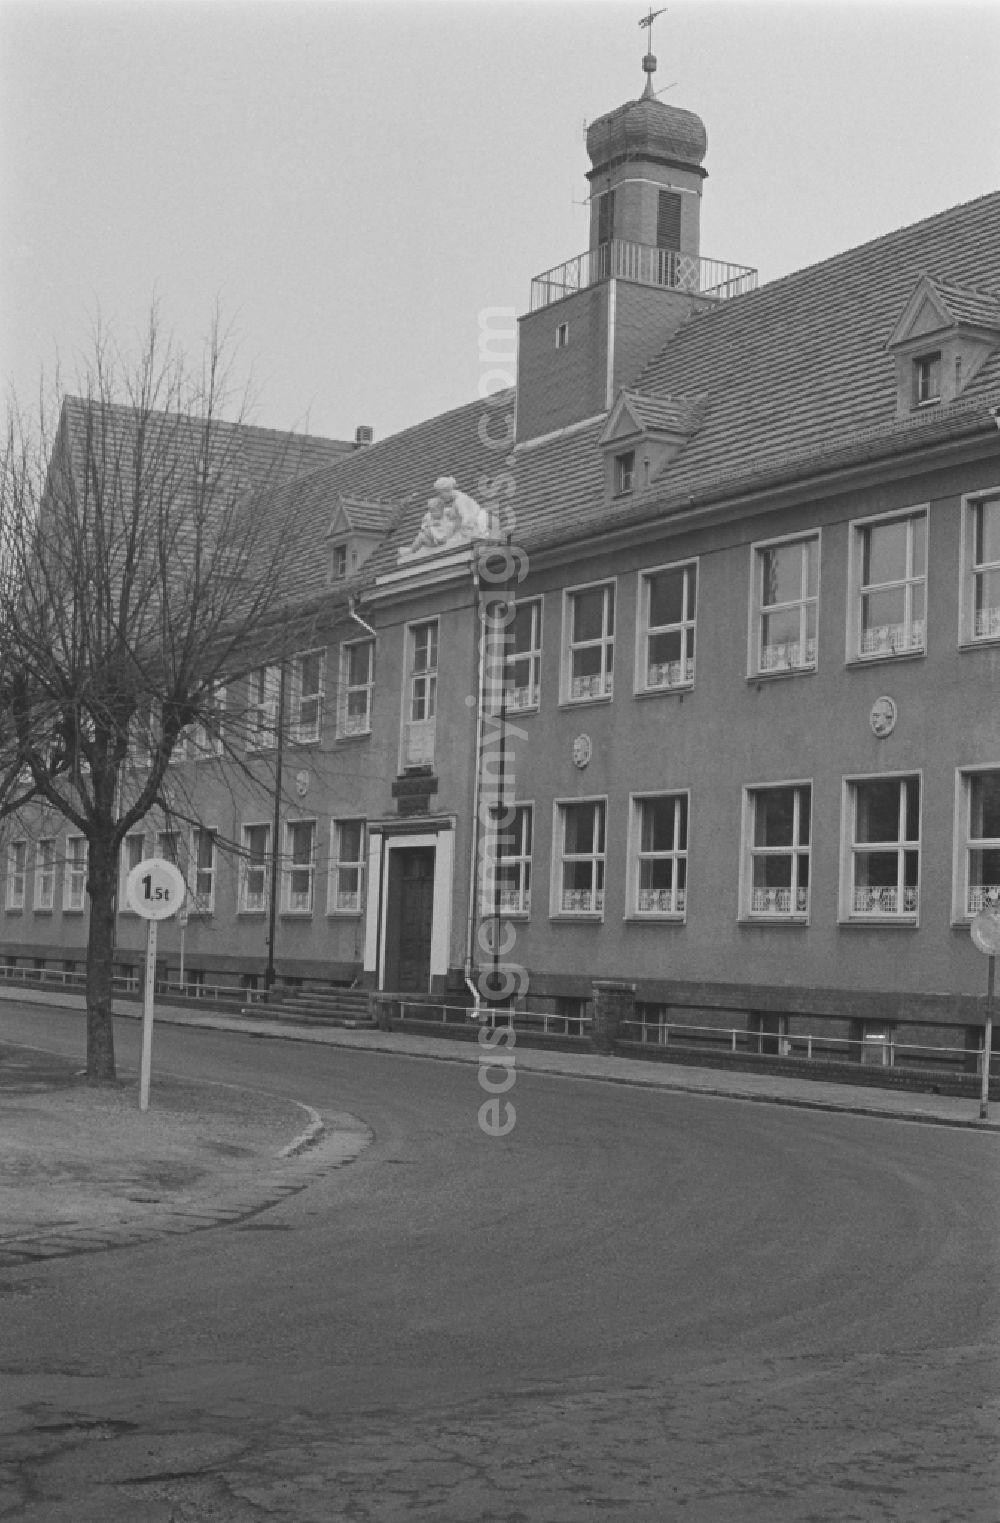 GDR photo archive: Laubusch - School building with tower - Secondary School OS Dr. Richard Sorge at Laubuscher Markt in the Upper Lusatian workers settlement Gartenstadt Erika in Laubusch in the state of Saxony on the territory of the former GDR, German Democratic Republic